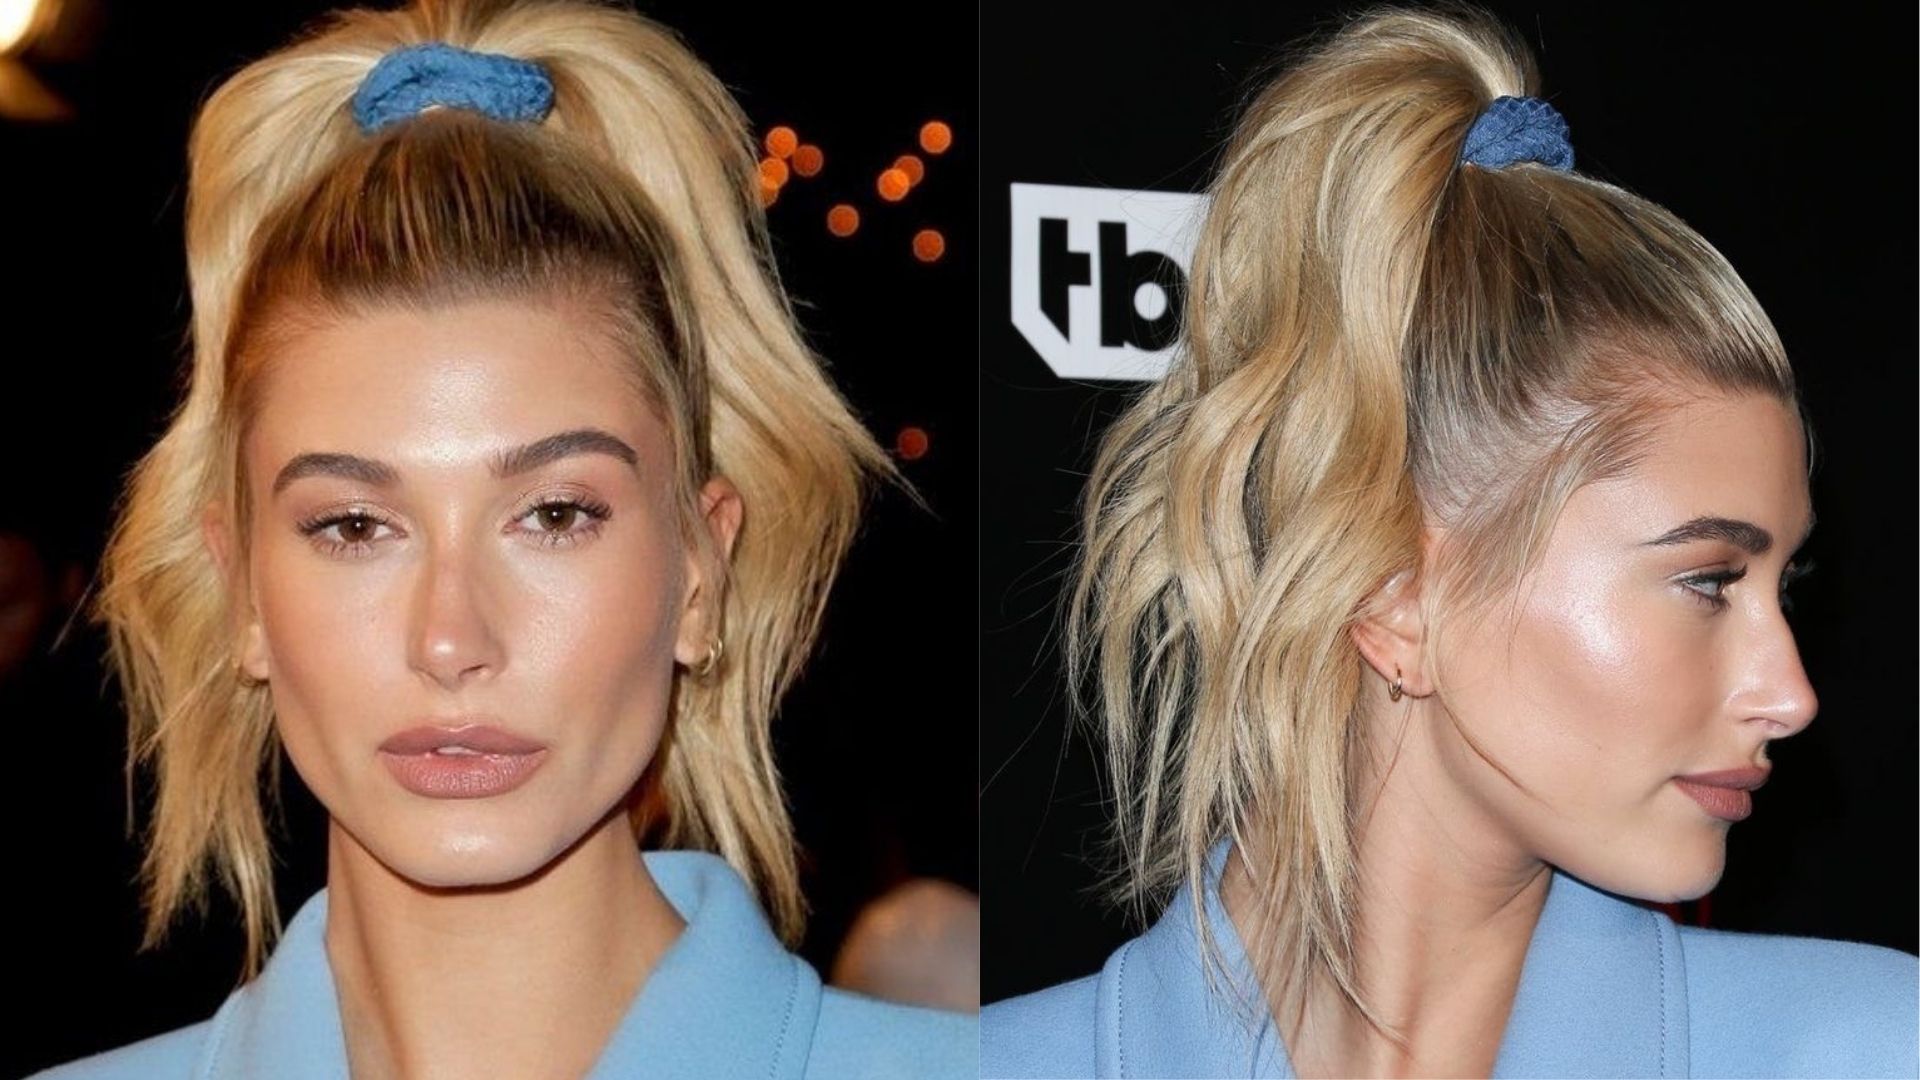 Scrunchie Hair Accessory Are Cool Again, Here's How To Wear Them